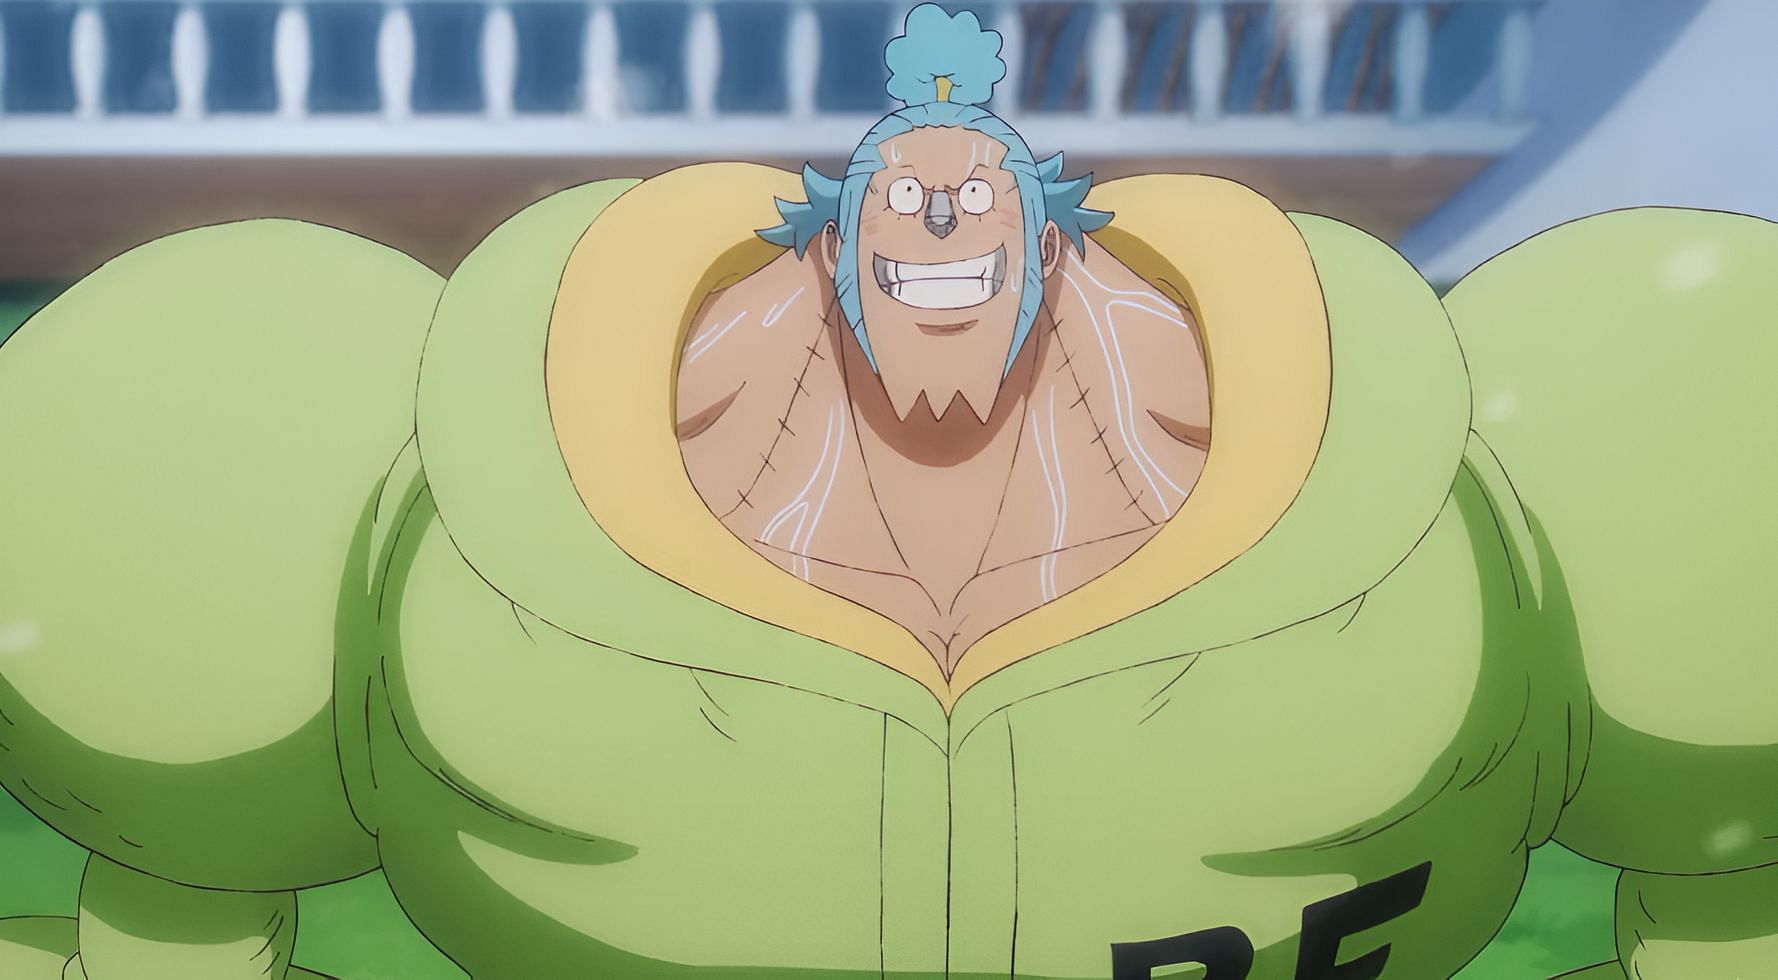 Franky as seen in the anime (Image via Toei Animation)